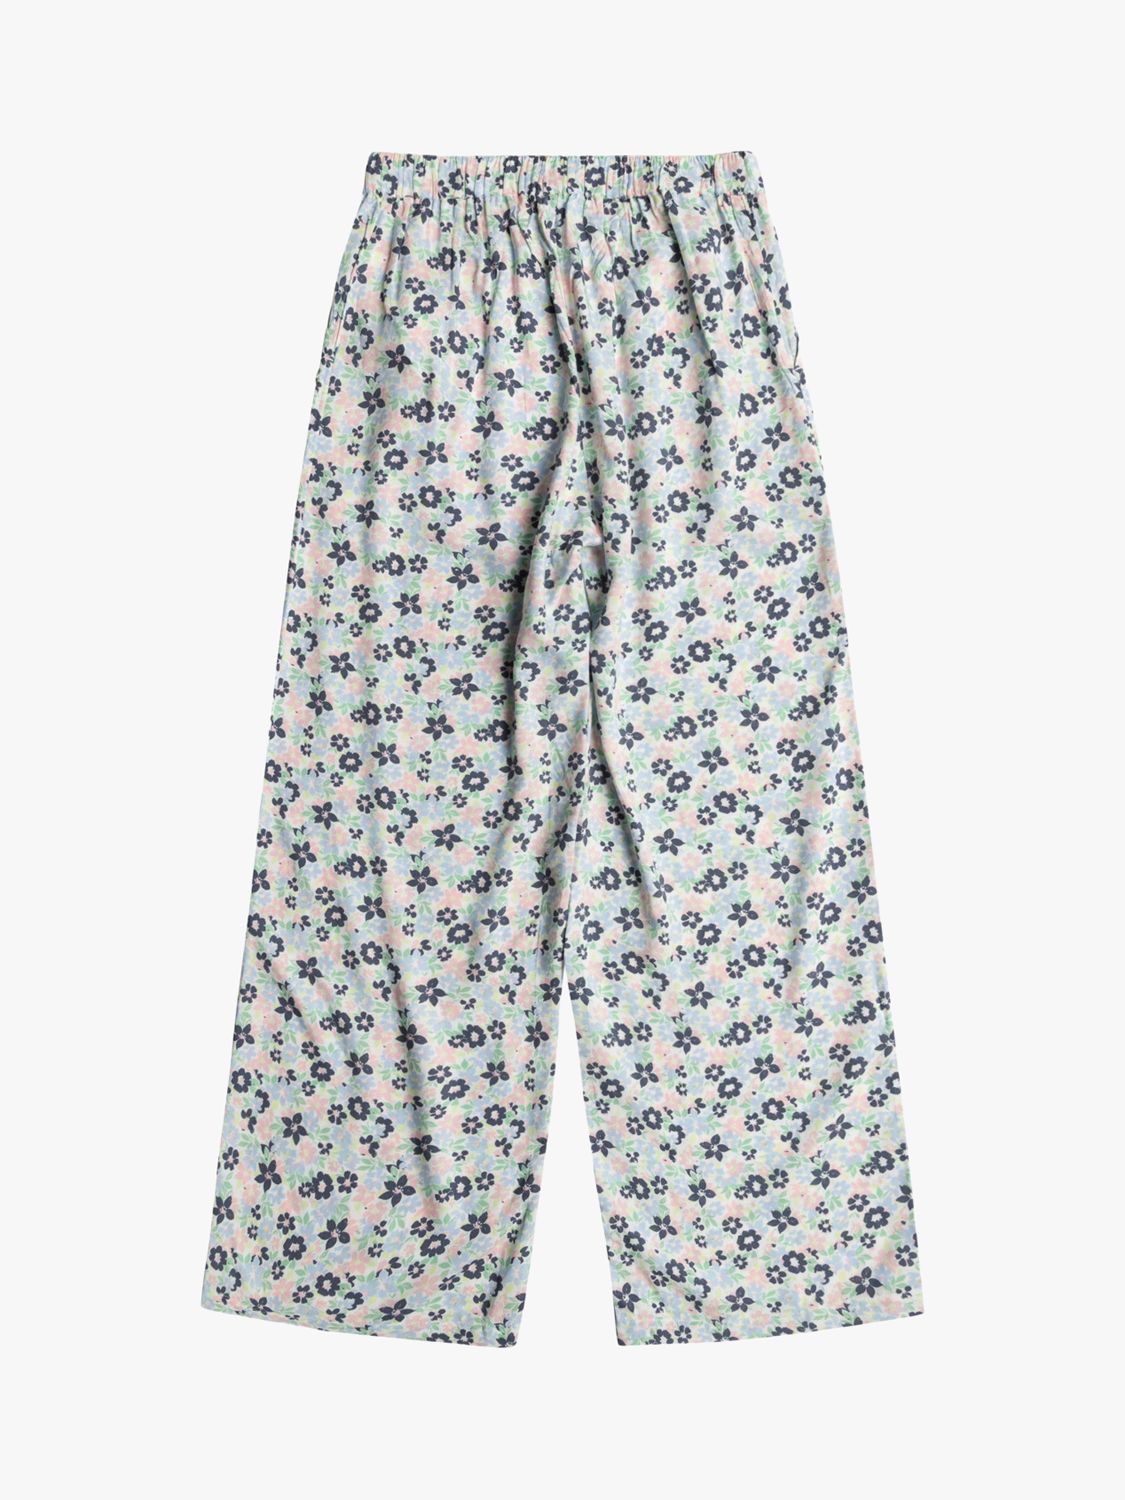 Roxy Kids' You Found Me Floral Print Palazzo Trousers, Bel Air Ephemere, 16 years